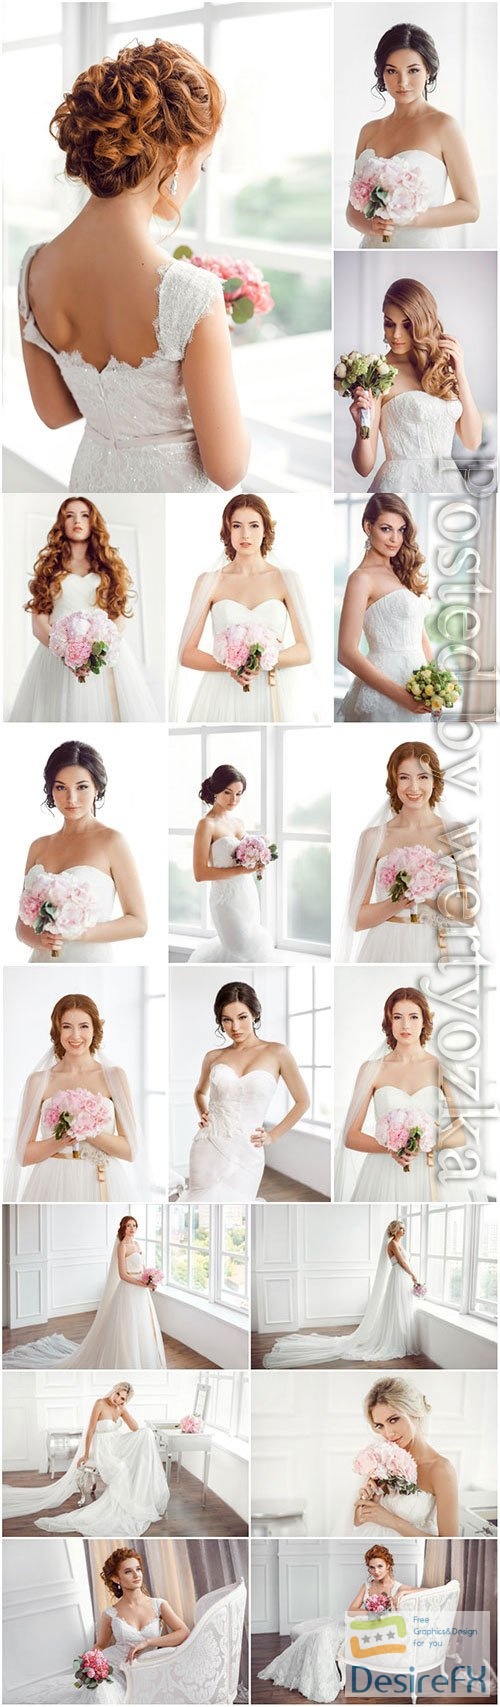 Lovely brides in luxurious dresses stock photo